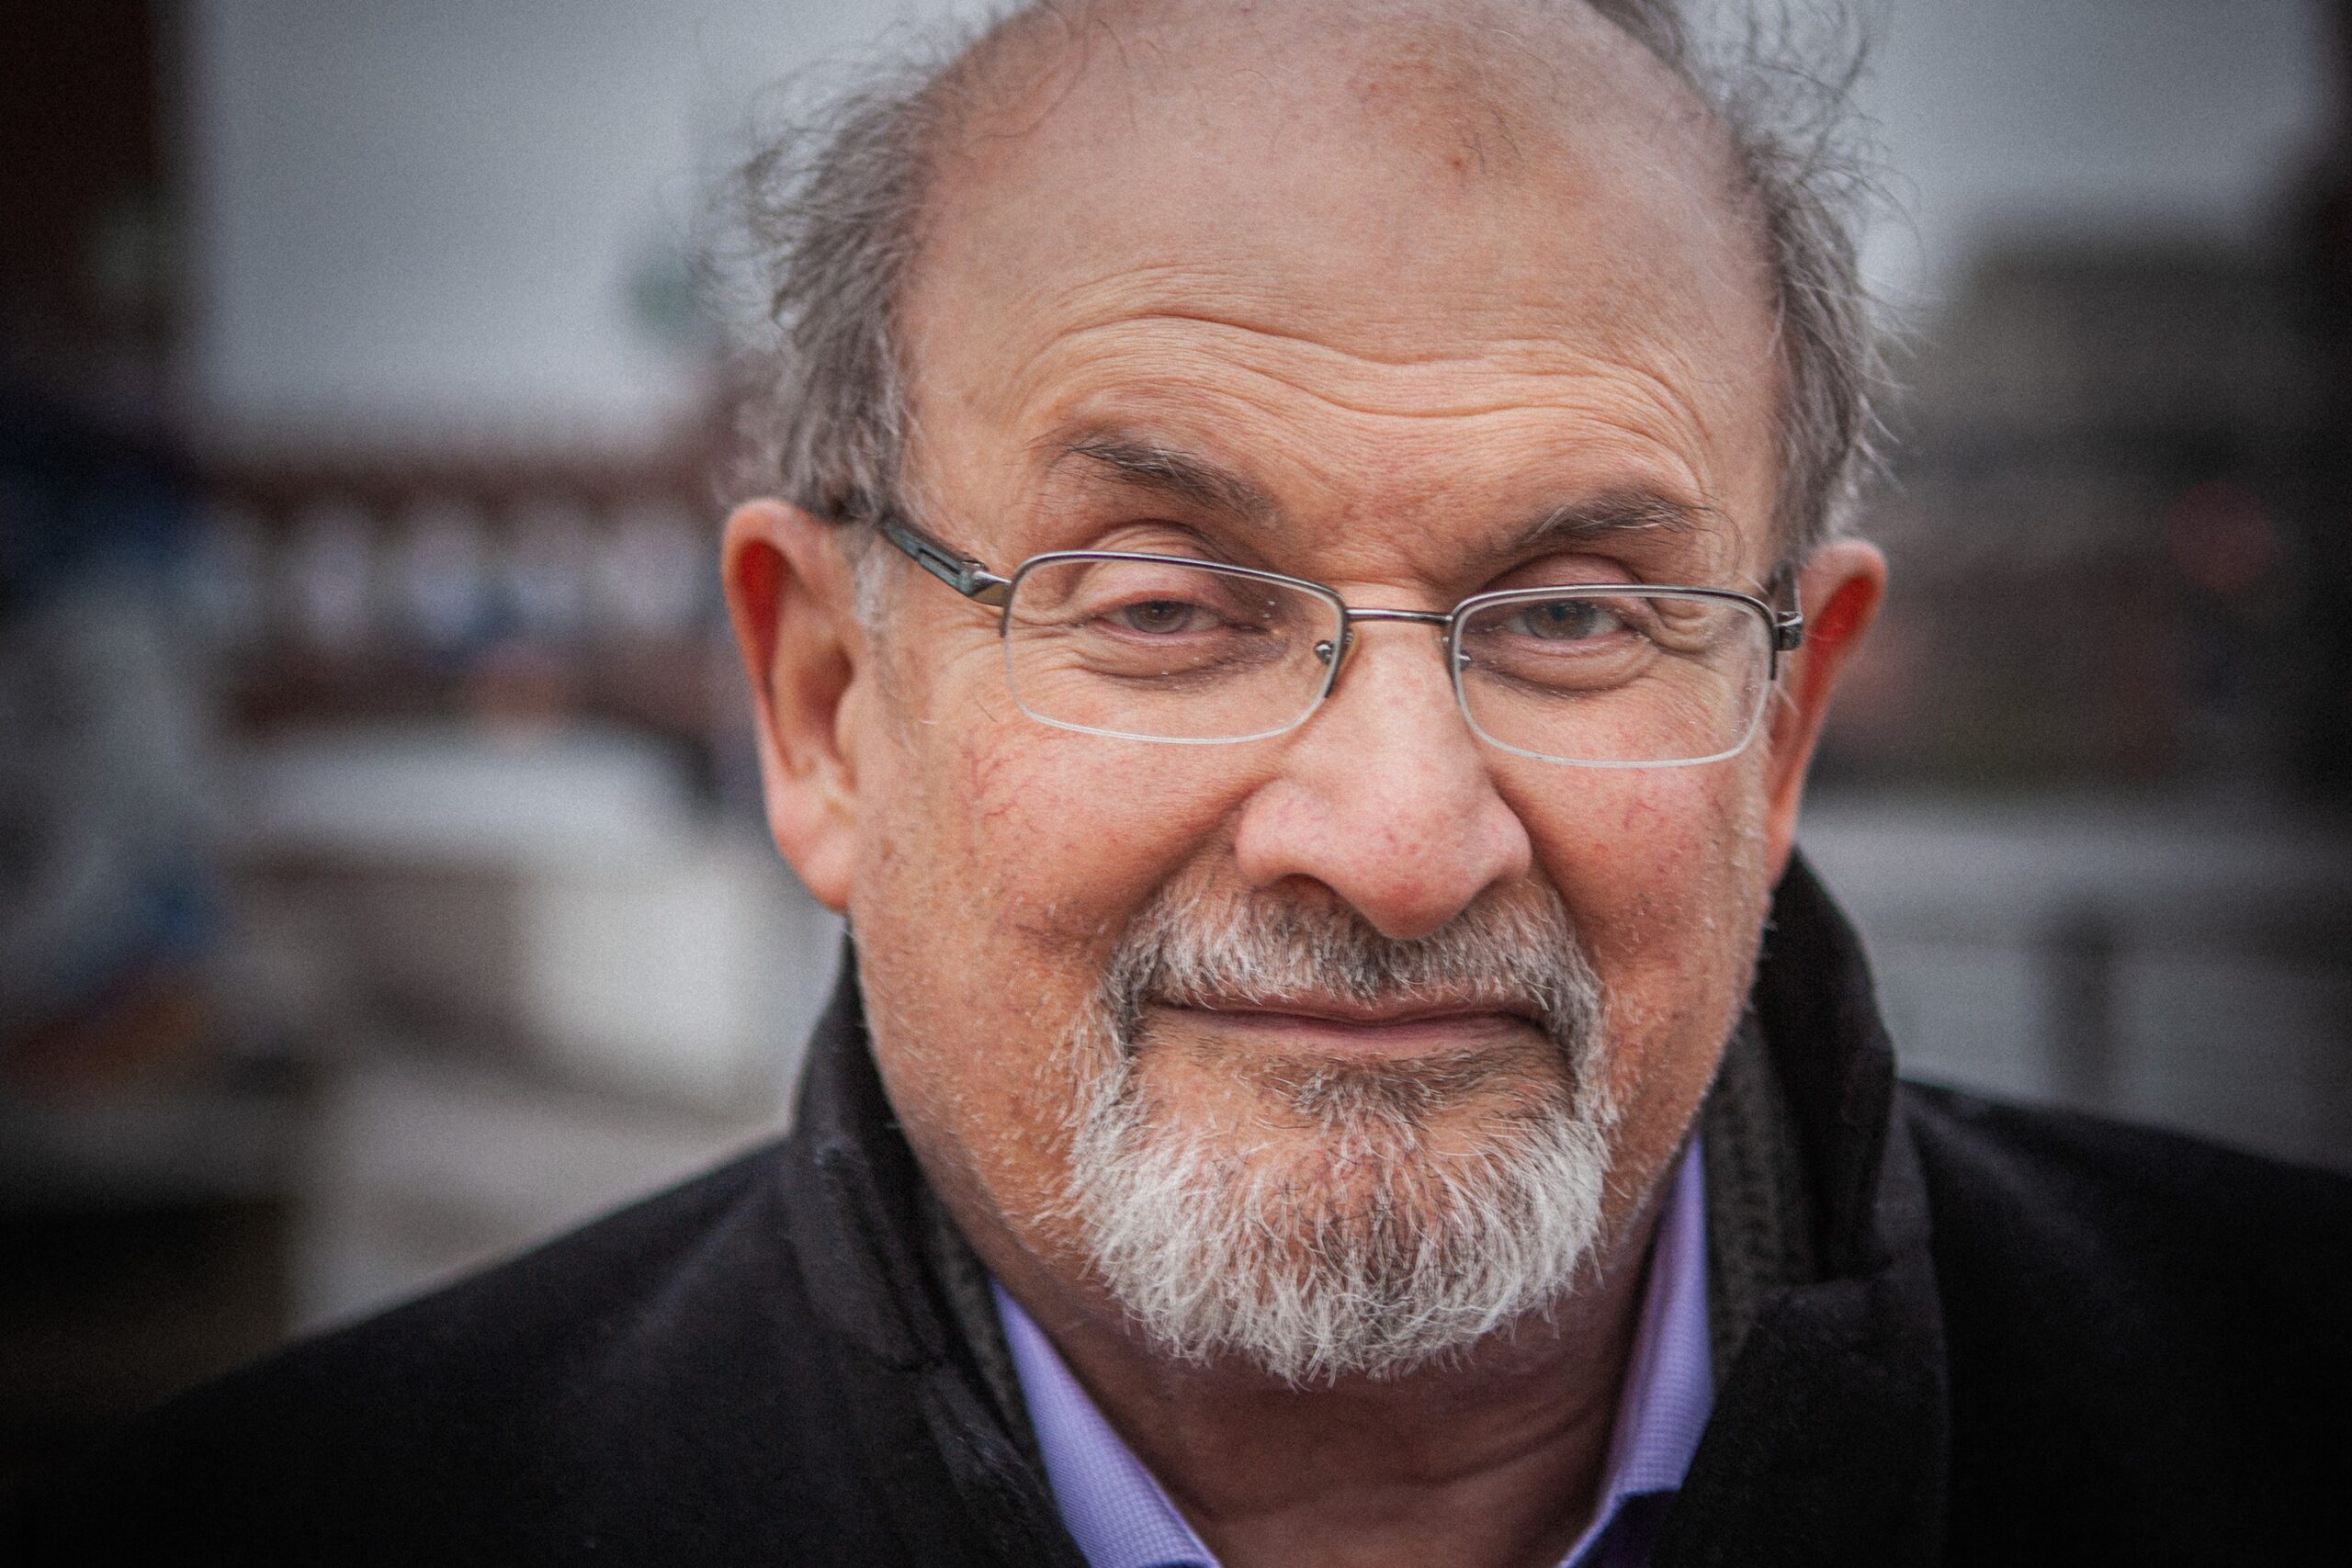 Grow up: Salman Rushdie to far-right Italian PM for legal actions against critics